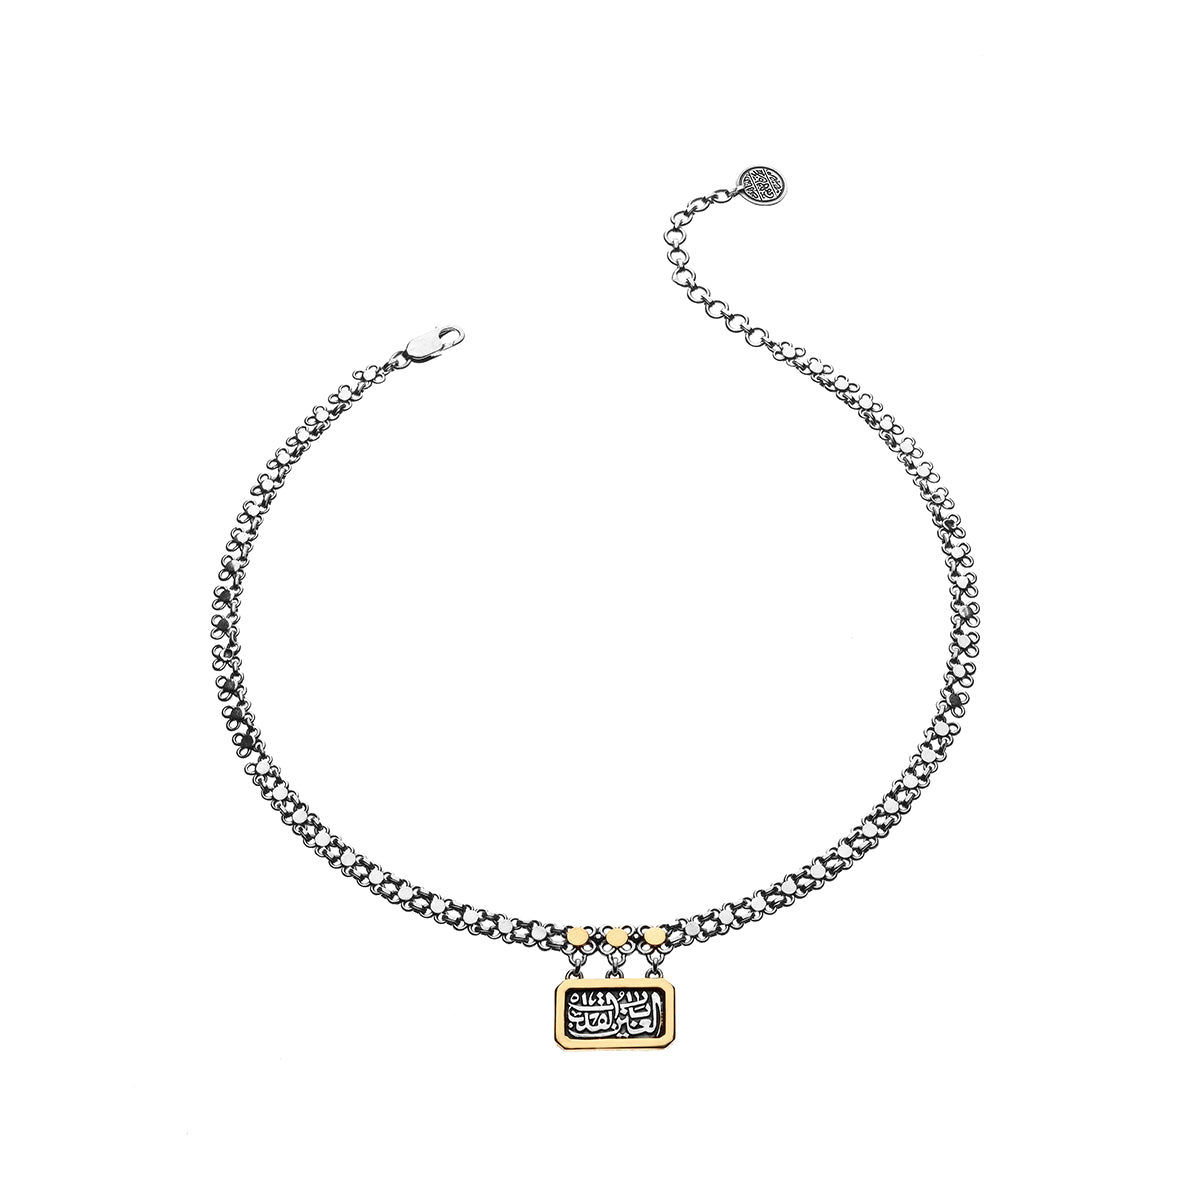 Classic Chain Necklace by Azza Fahmy - Designer Necklaces